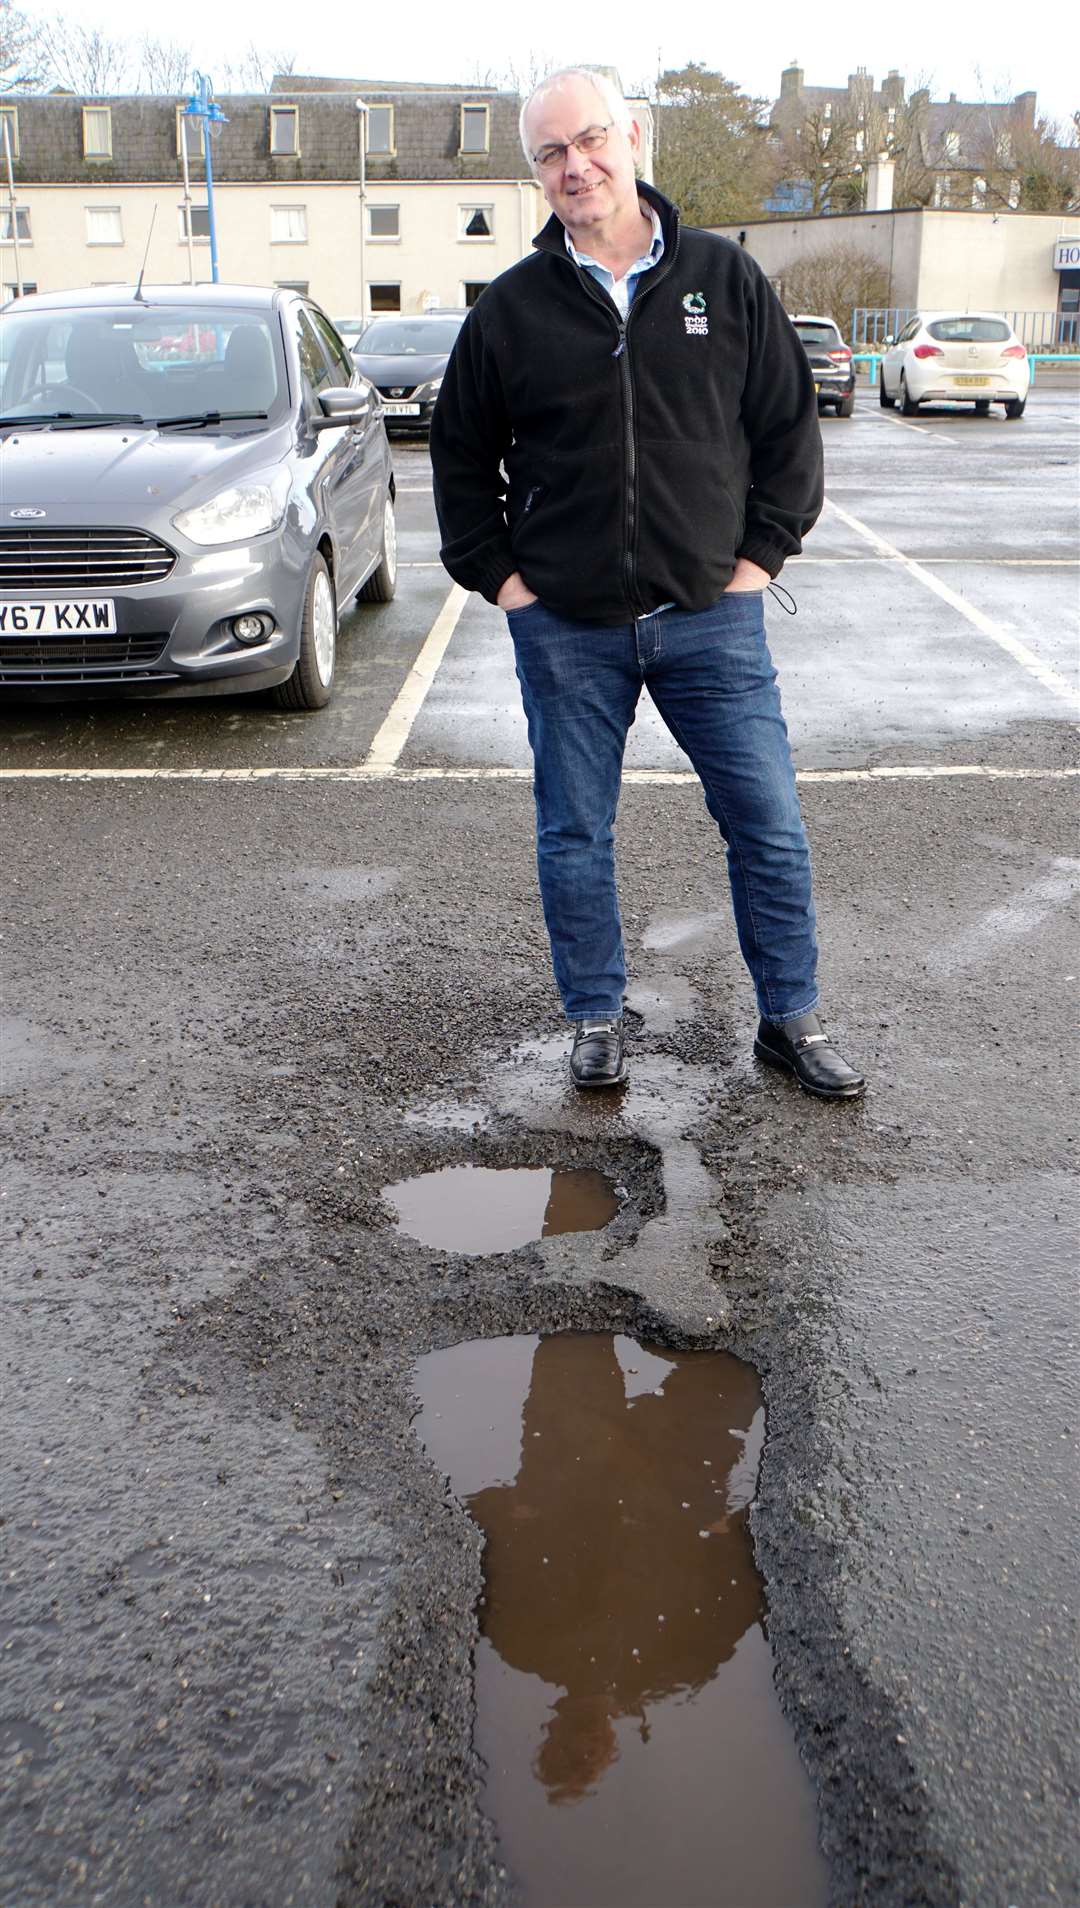 Councillor Raymond Bremner is concerned about the condition of the car park.